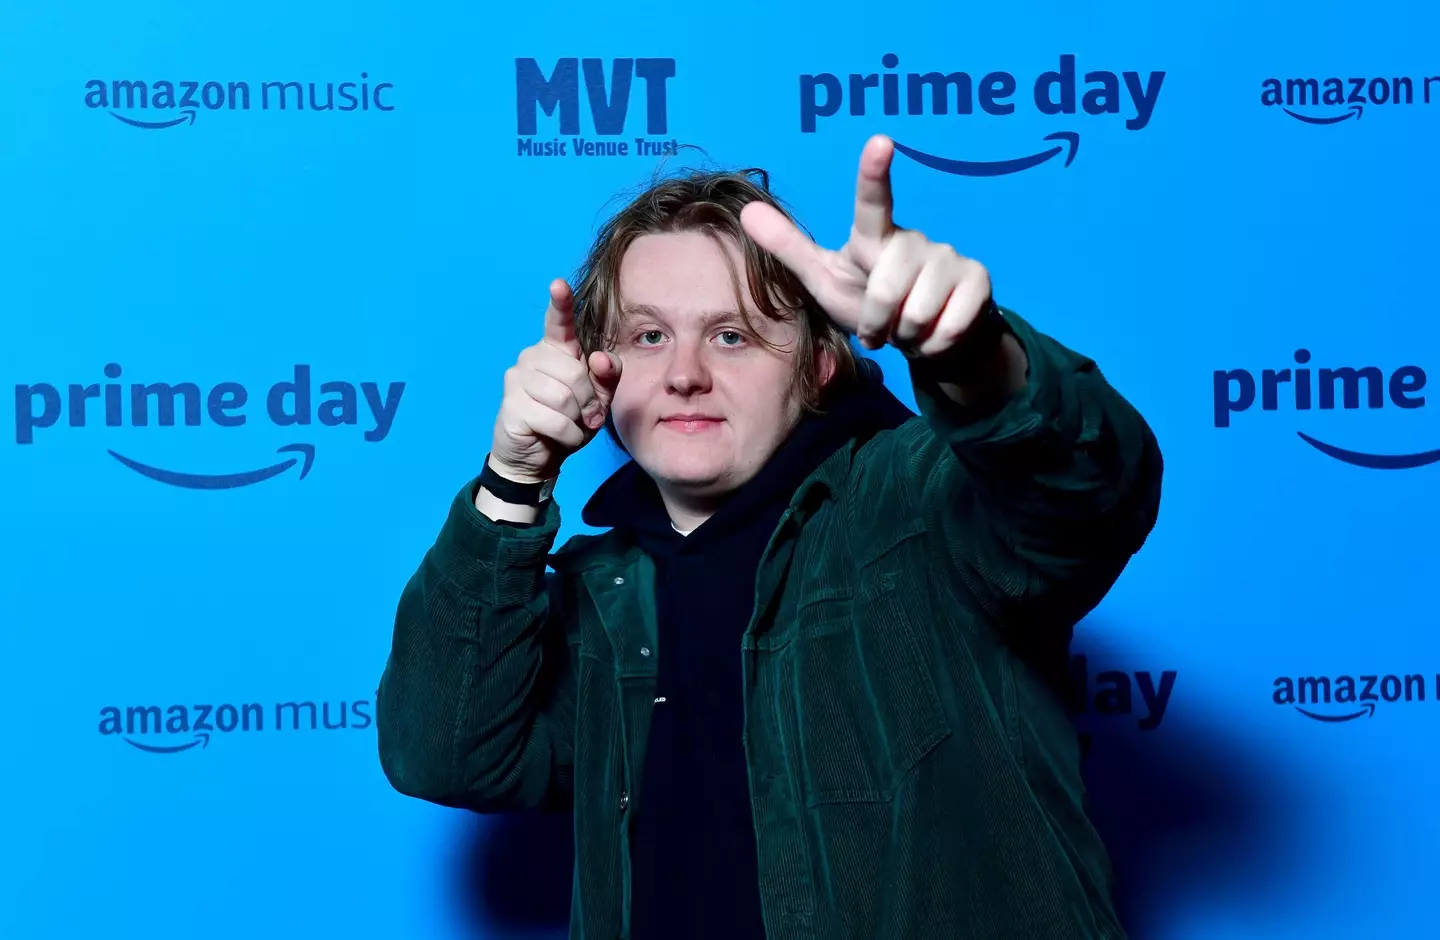 Lewis Capaldi's marketing scheme has rubbed some fans the wrong way.